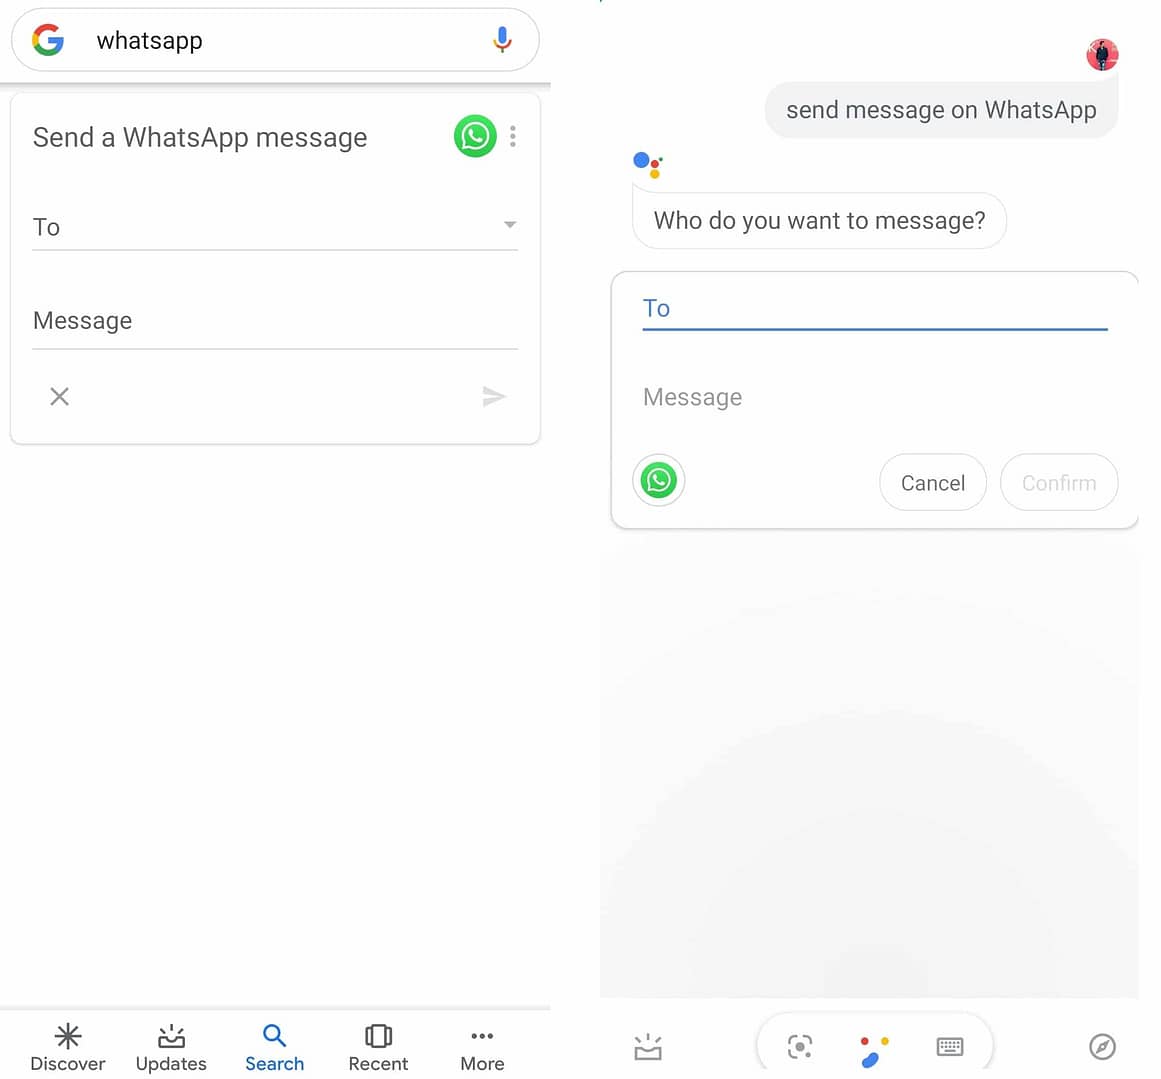 Send WhatsApp Messages Without Appearing Online